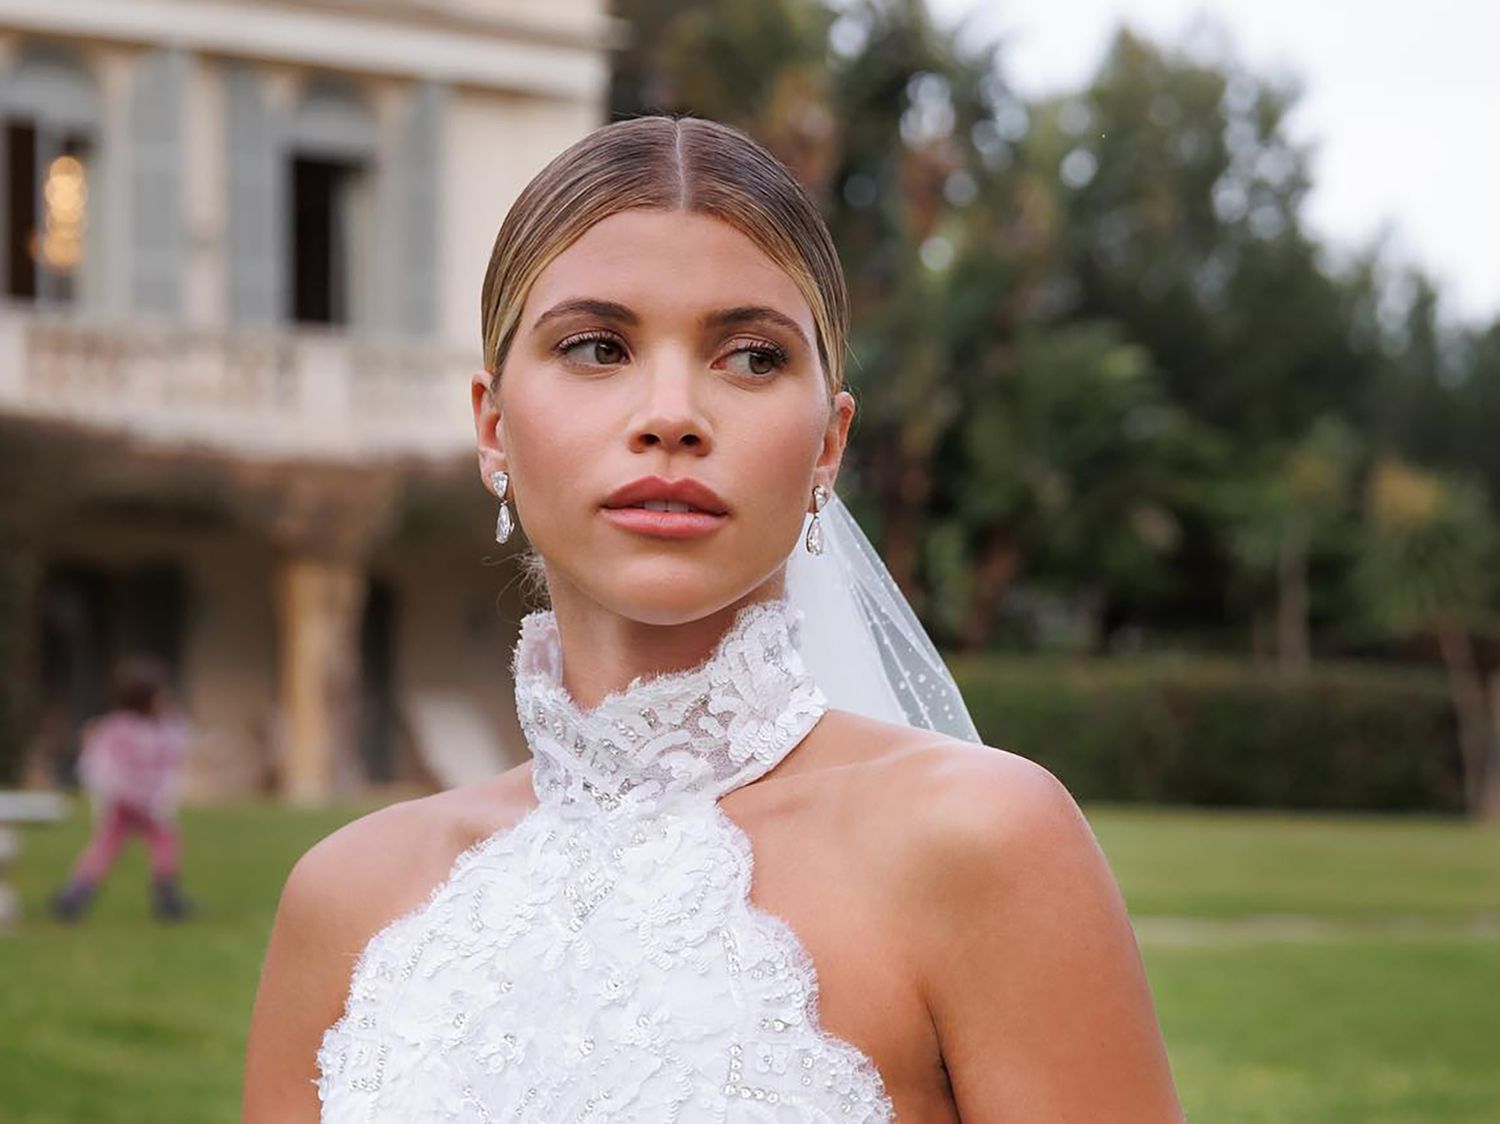 Bridal Beauty: Prepping for Your Special Day